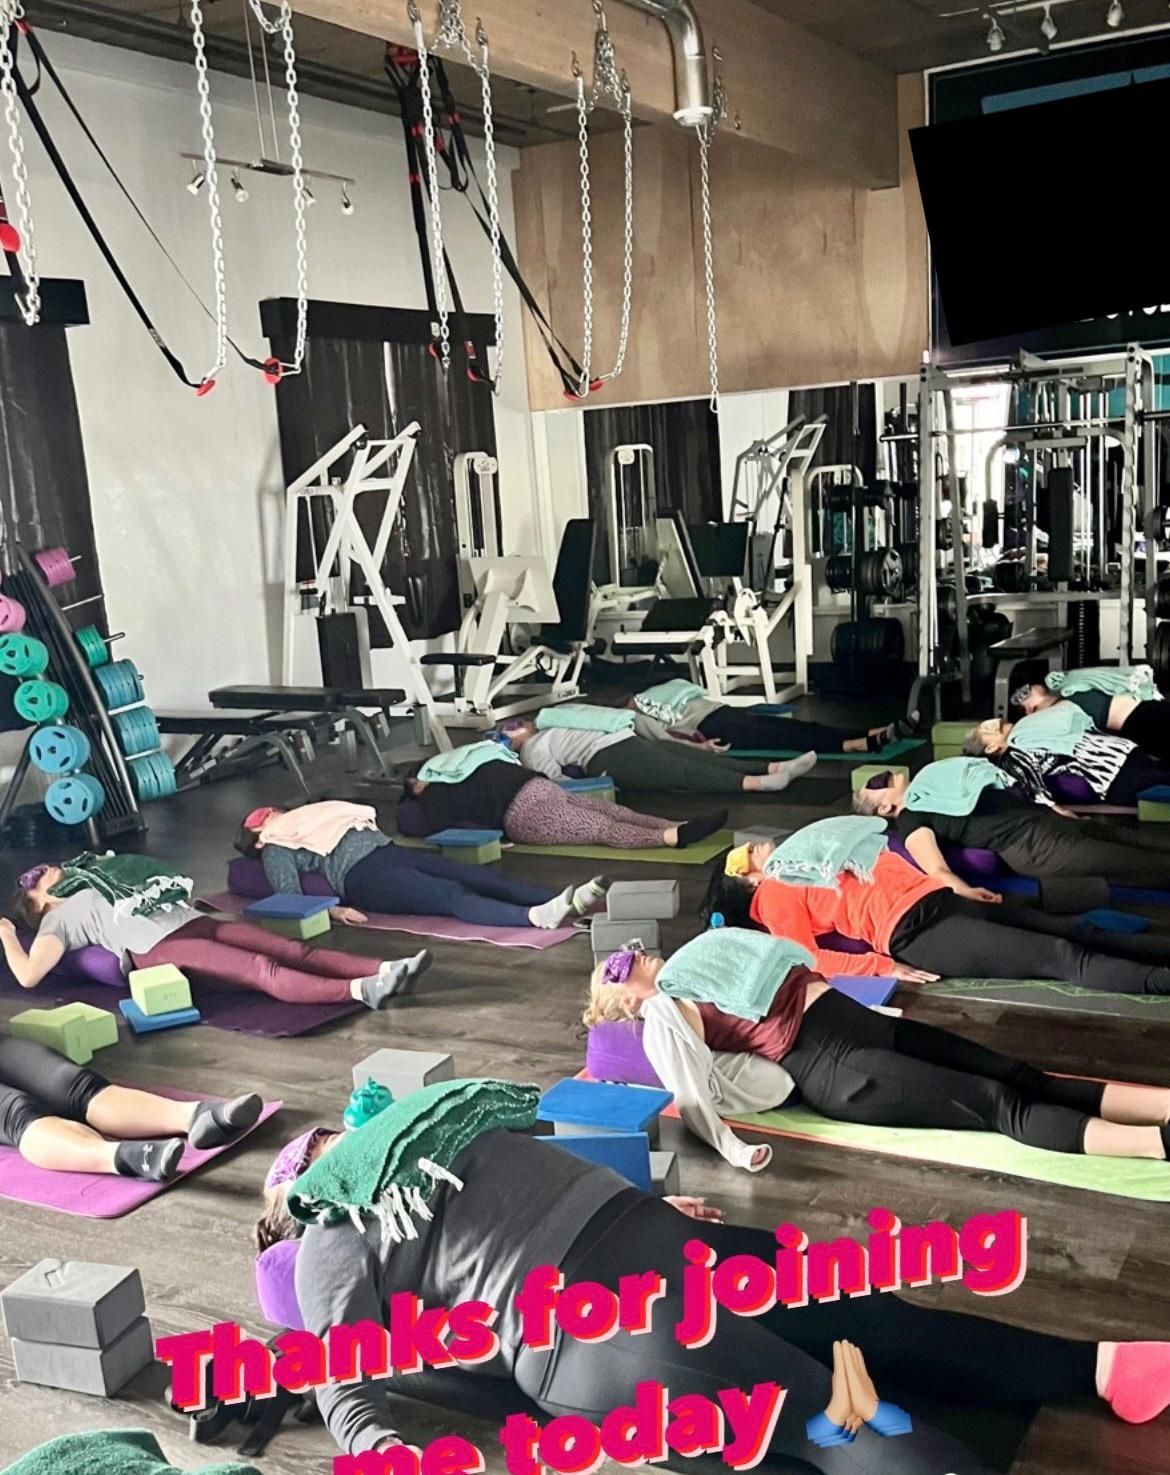 My sister’s photo of her yoga class’ warmup looks like the aftermath of a mass cult suicide.